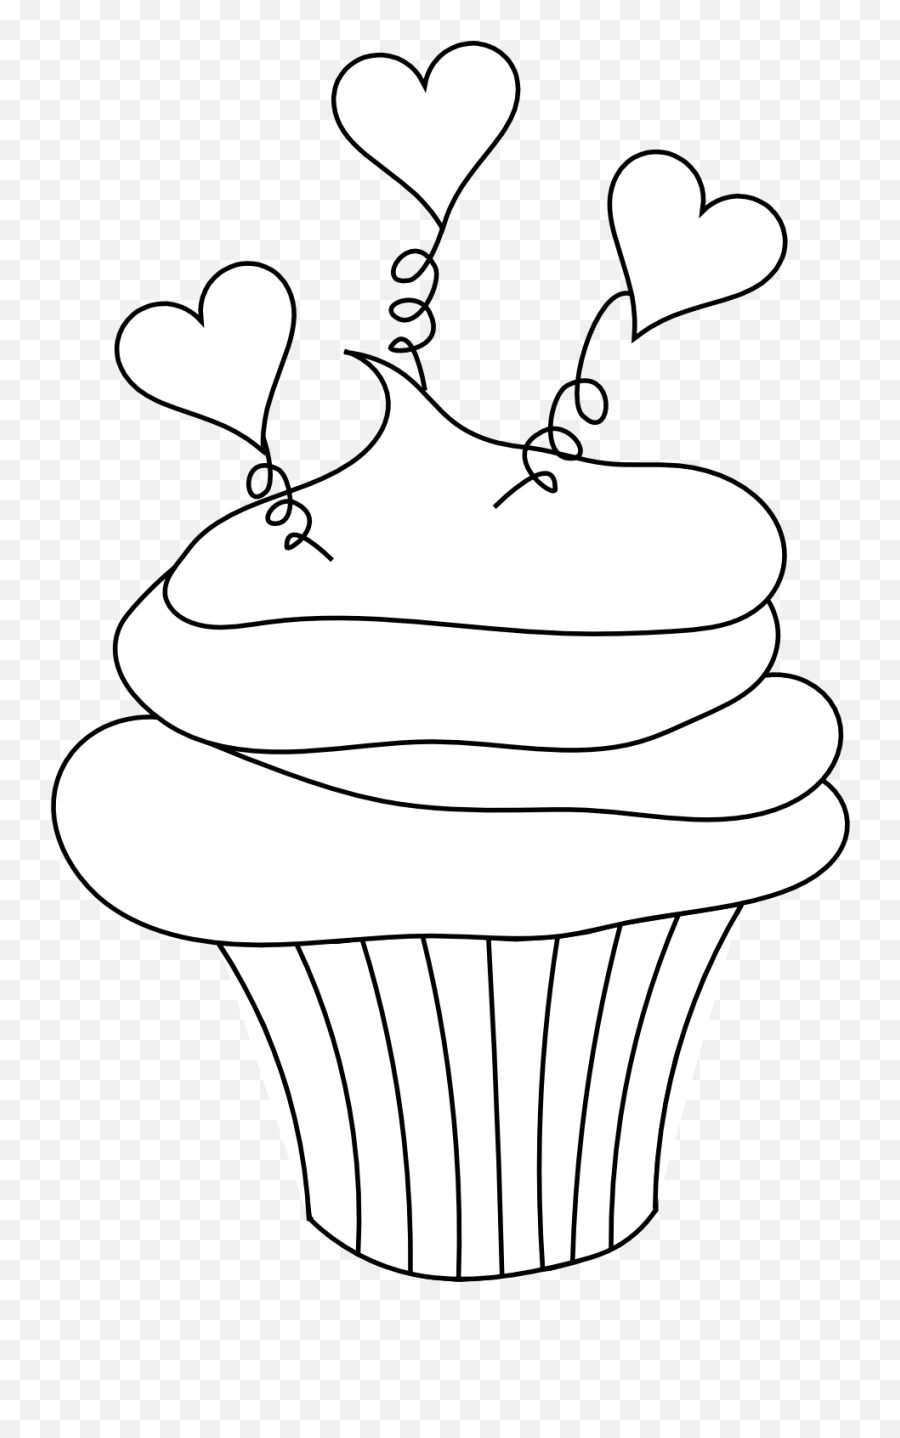 Free Black And White Cupcake Clipart - Outline Free Cupcake Clipart Emoji,Cupcake Clipart Black And White